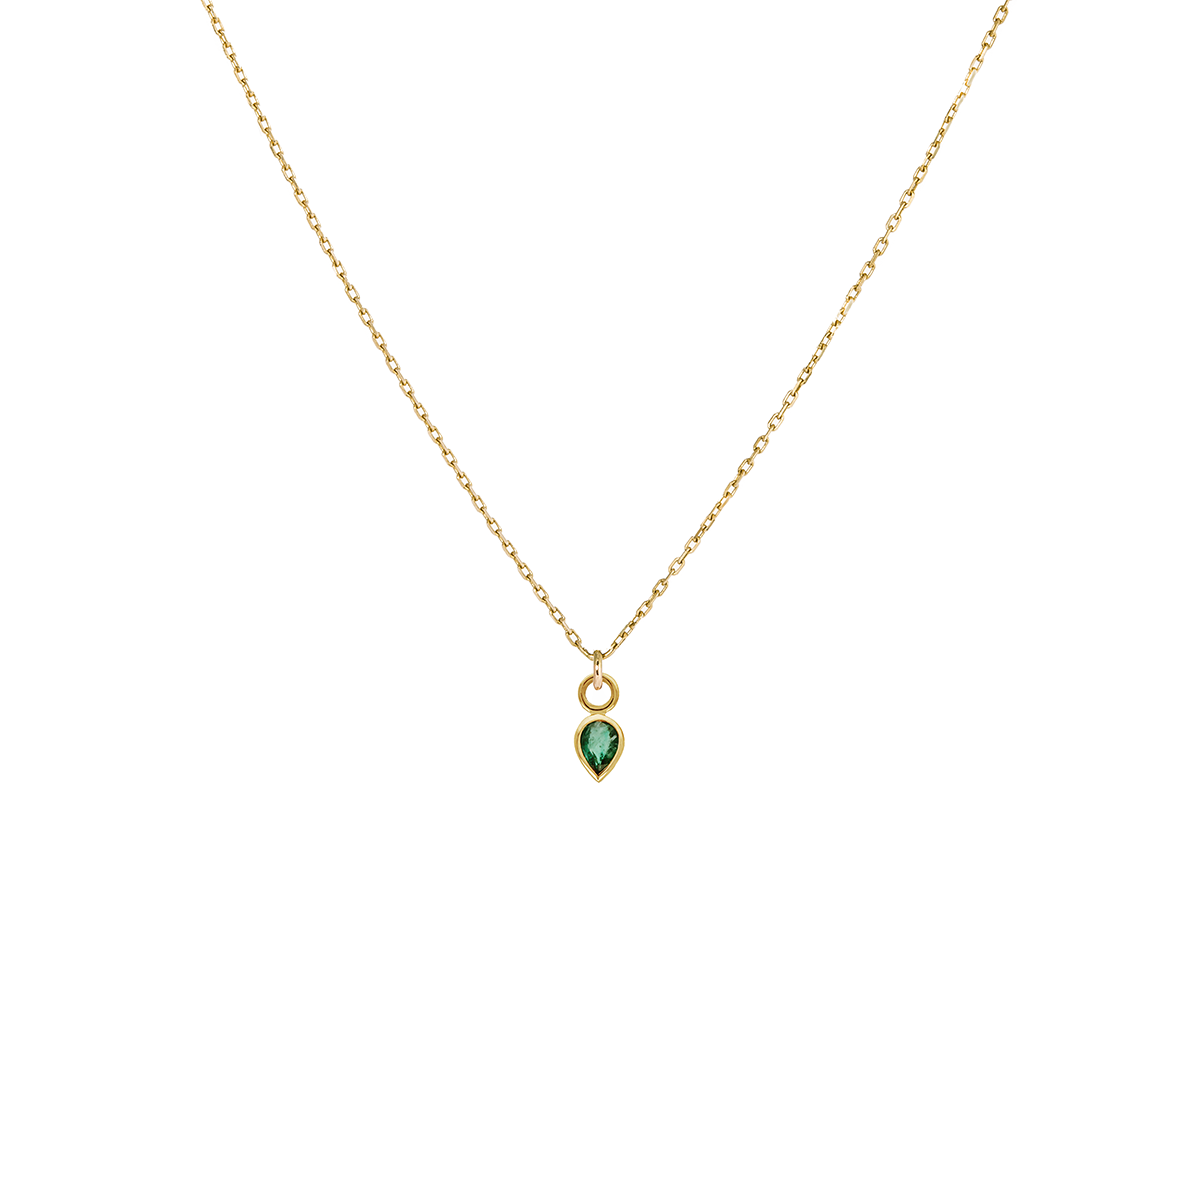 Métier by tomfoolery Diamond Cut Light Chain with Emerald Pear Cut Plaque